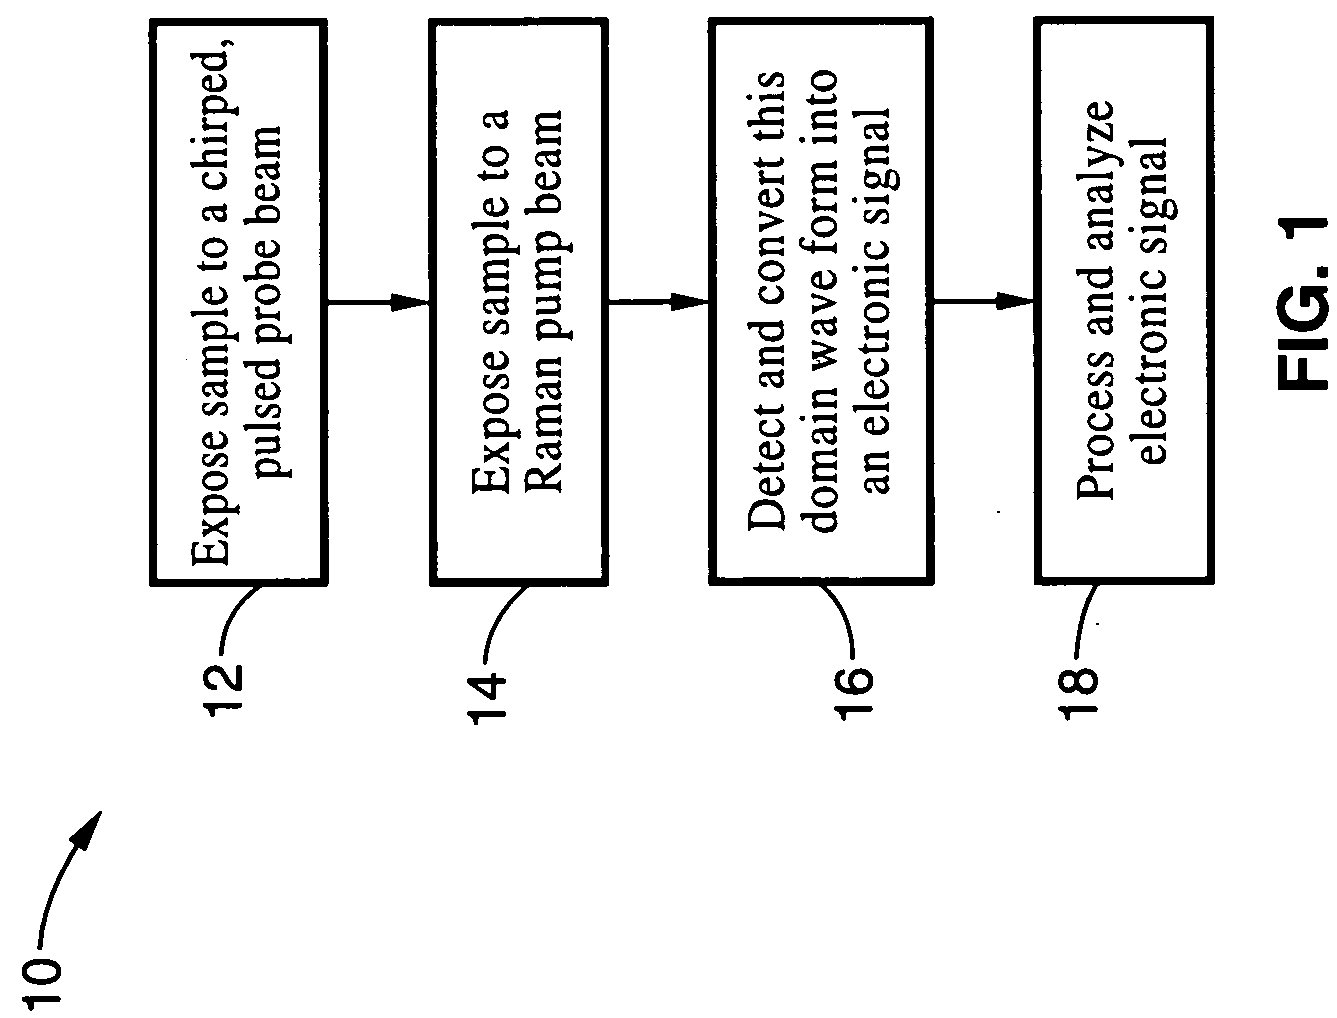 Apparatus and method for raman spectroscopy and microscopy with time domain spectral analysis